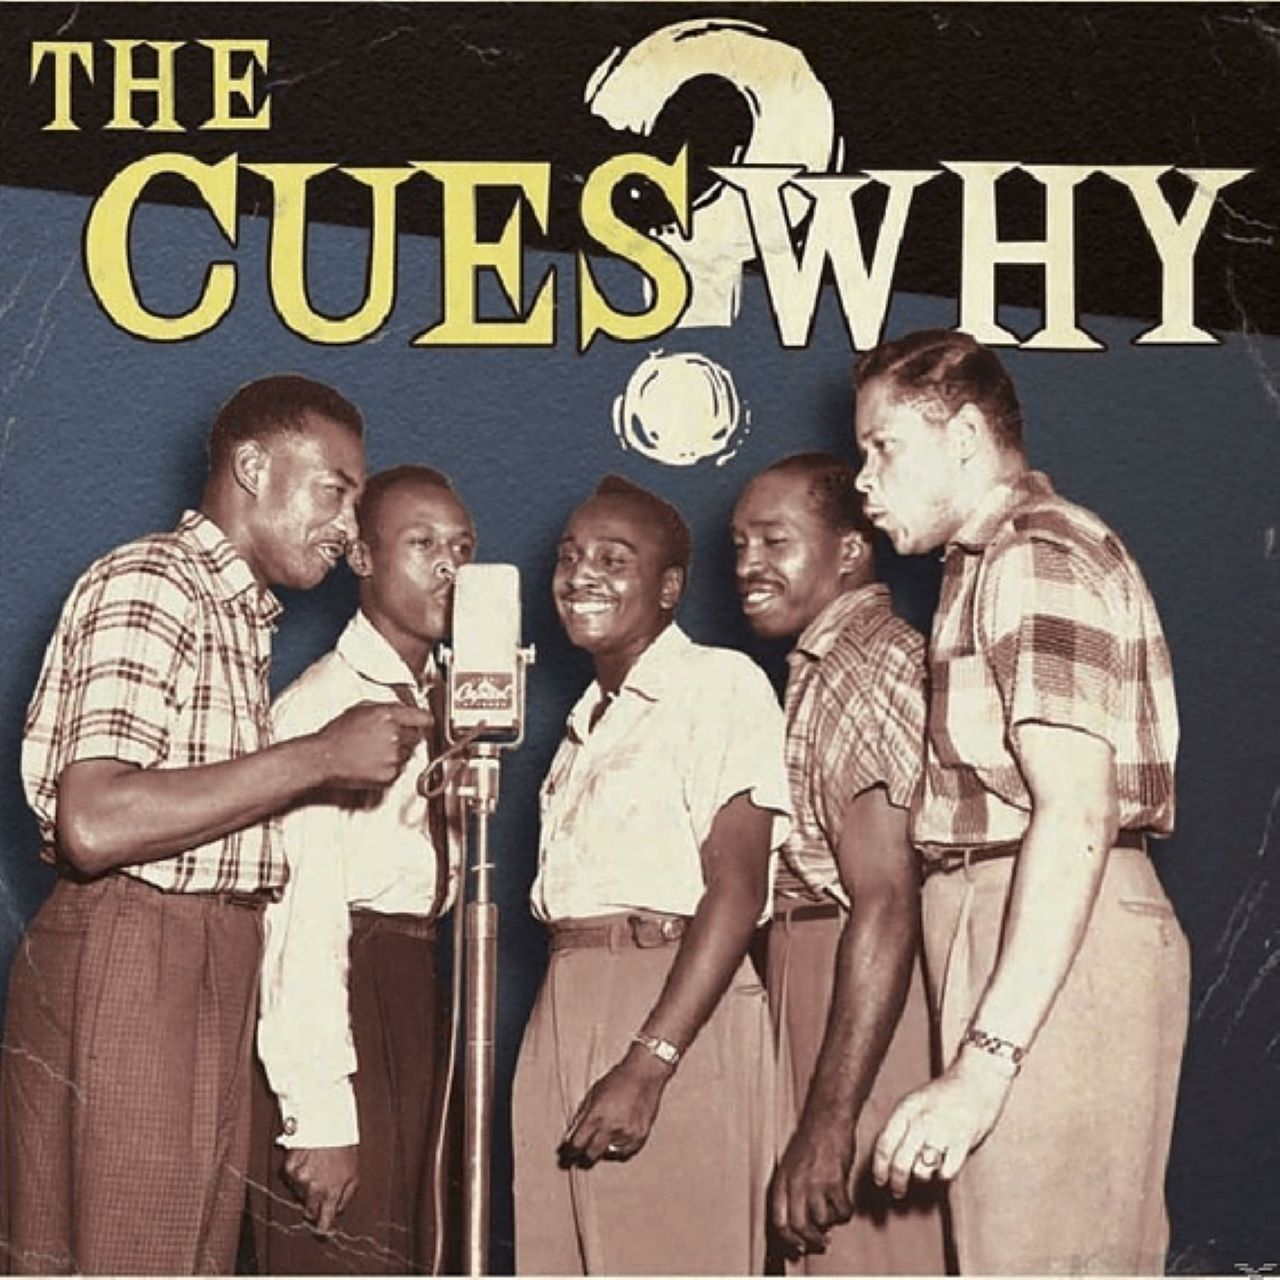 The Cues – “Why” cover album